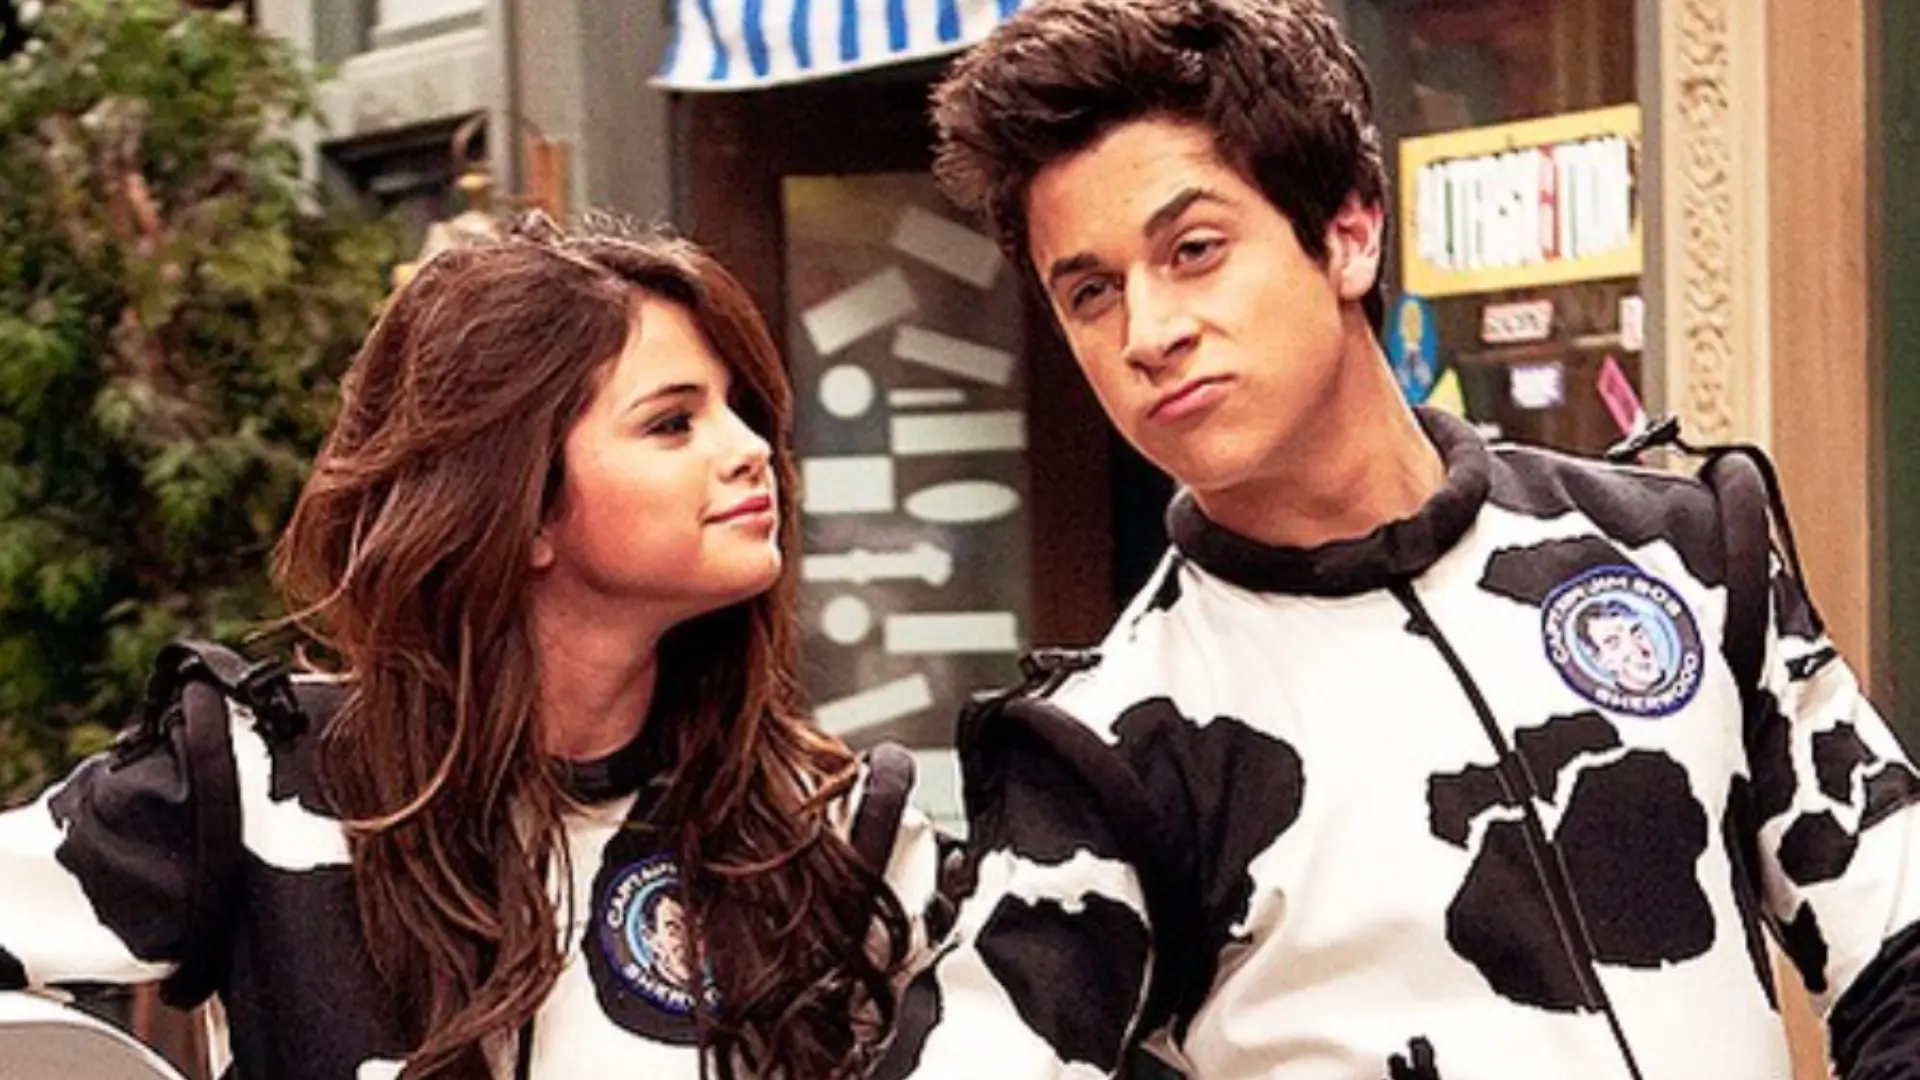 The long-awaited return of the series Wizards of Waverly Place with Selena Gomez and David Henrie - Instagram David Henrie